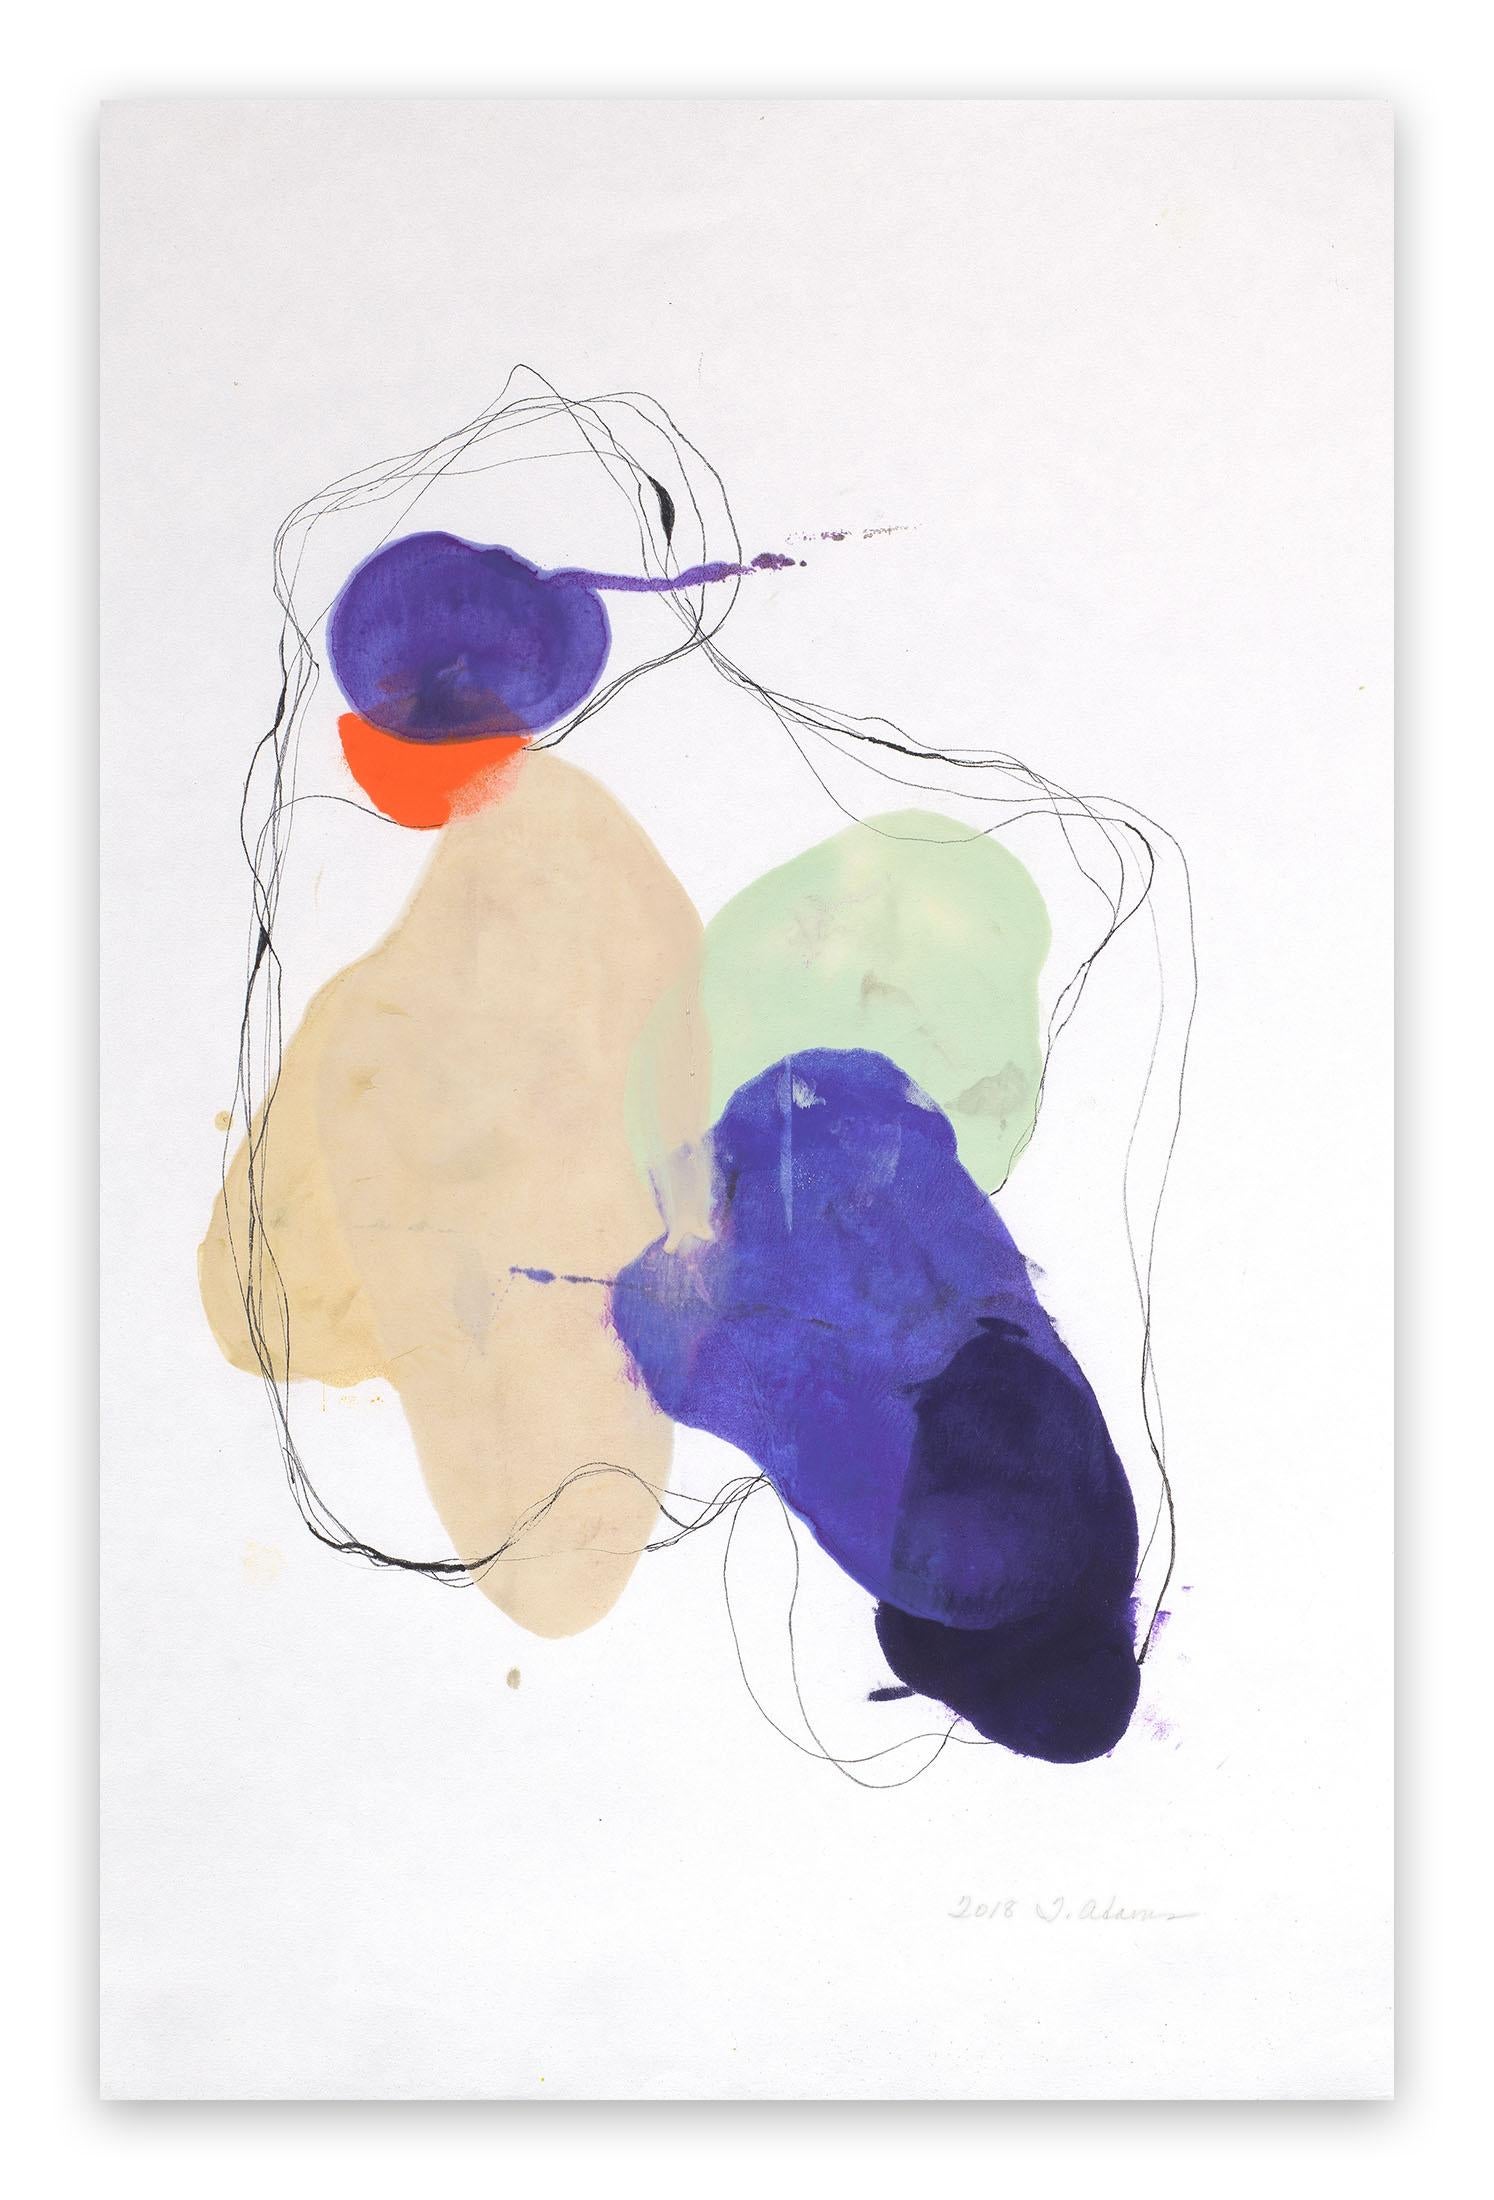 0118.2 (Abstract Painting)

Pigmented wax and ink on Shikoku paper - Unframed 

Working on paper has always been an important part of Tracey Adams daily practice.
For almost thirty years, drawing has provided a method to work on ideas for paintings